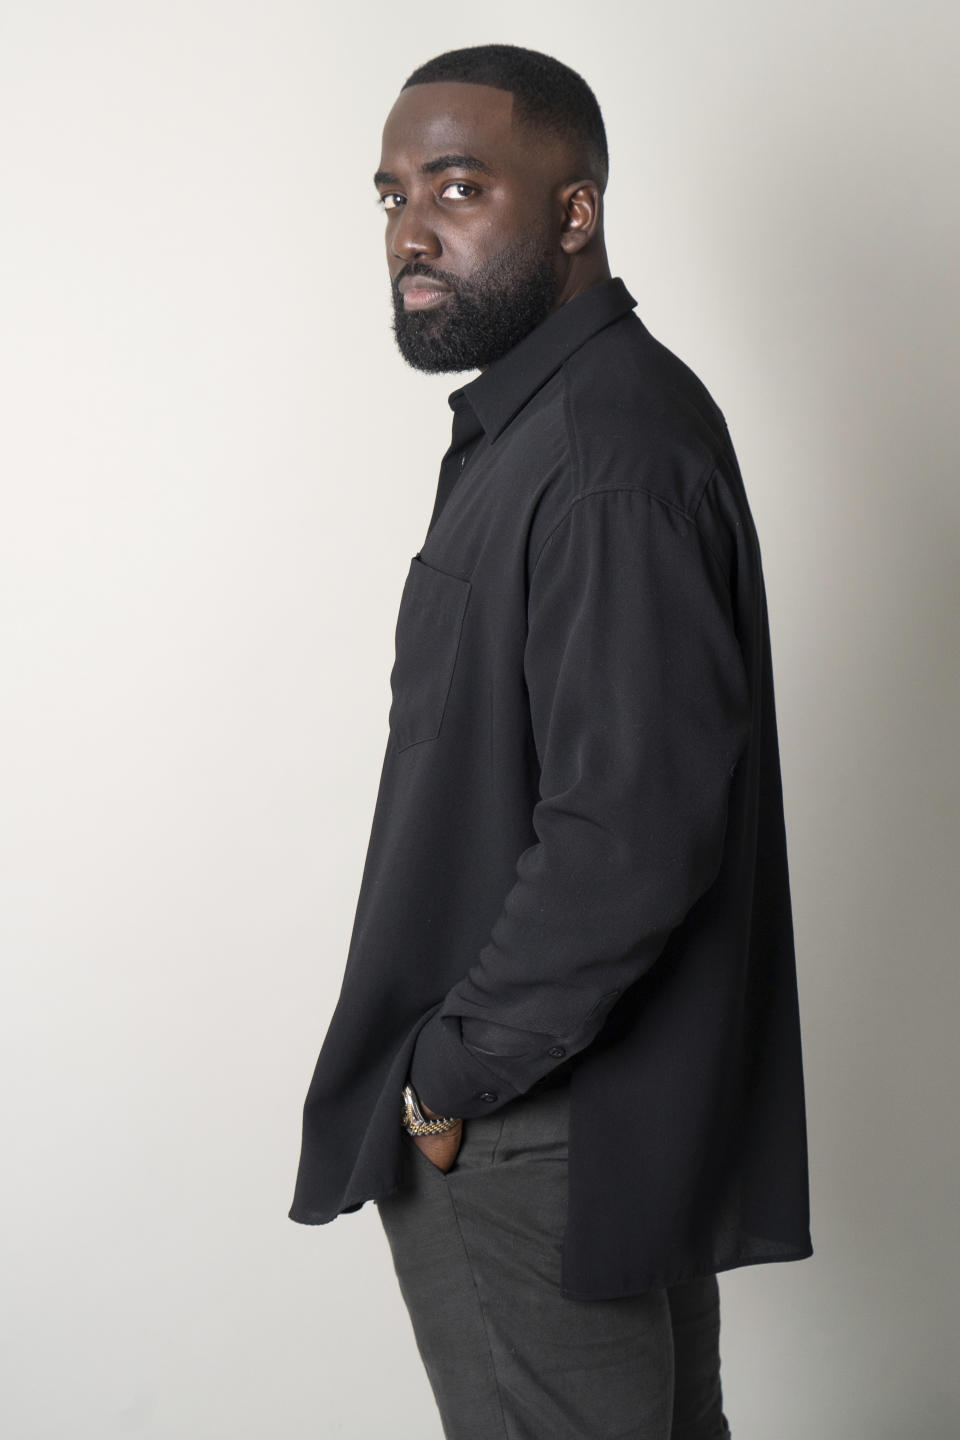 Shamier Anderson poses for a portrait in New York on March 15, 2023, to promote his film “John Wick: Chapter 4." (AP Photo/Gary Gerard Hamilton)